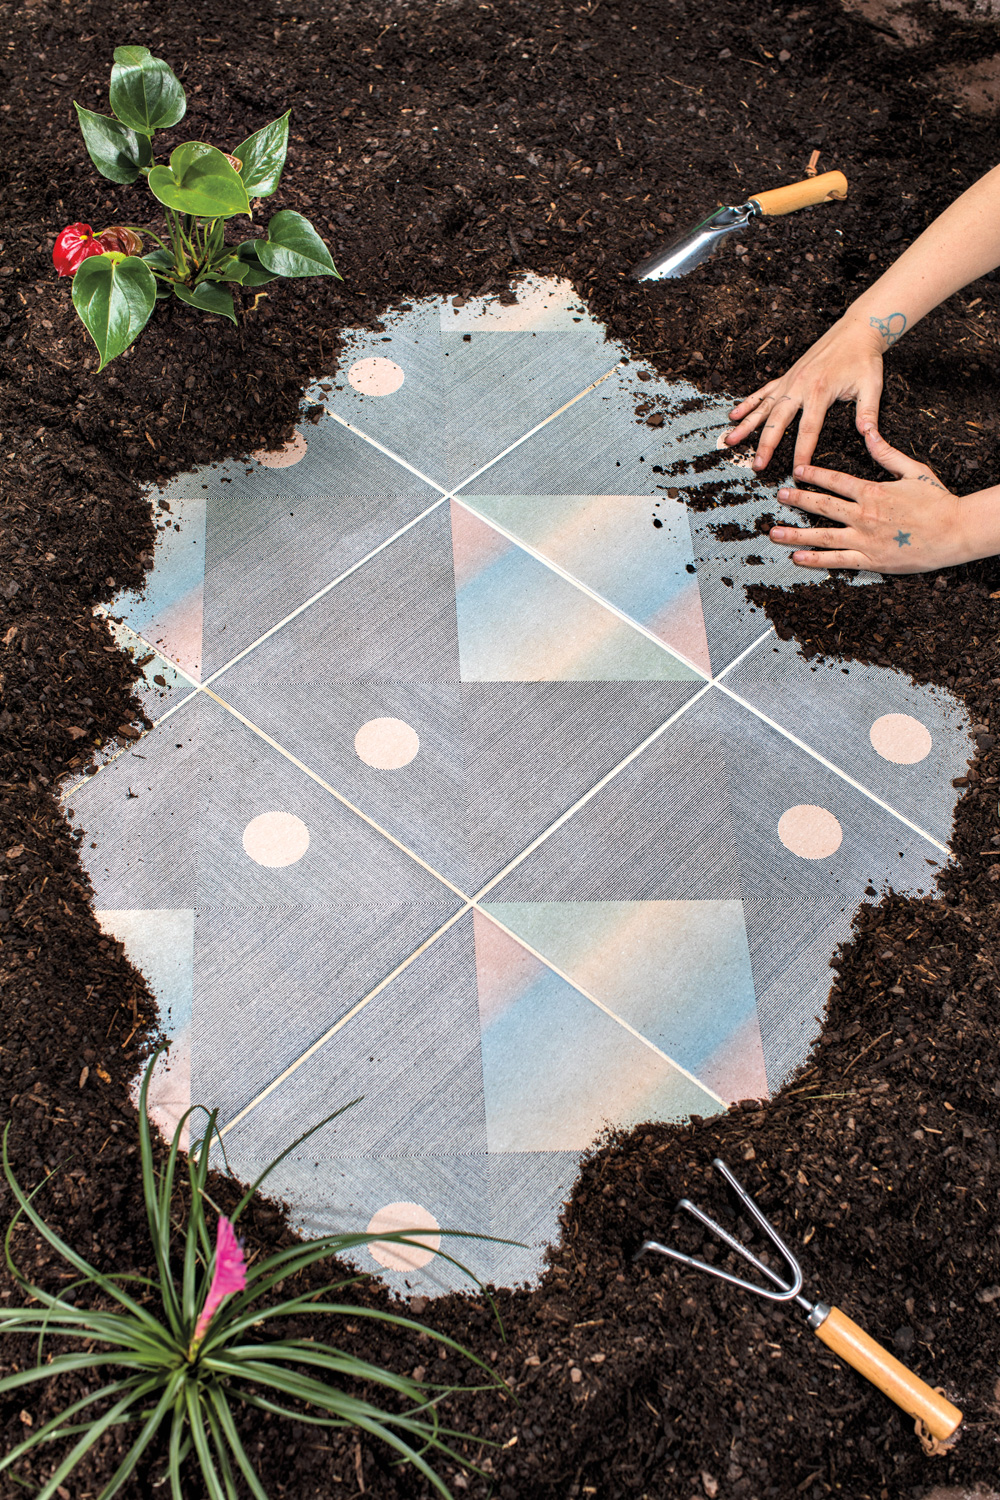 Haustile x Real Fun, Wow! tiles with soft rainbow motif being uncovered in a garden bed